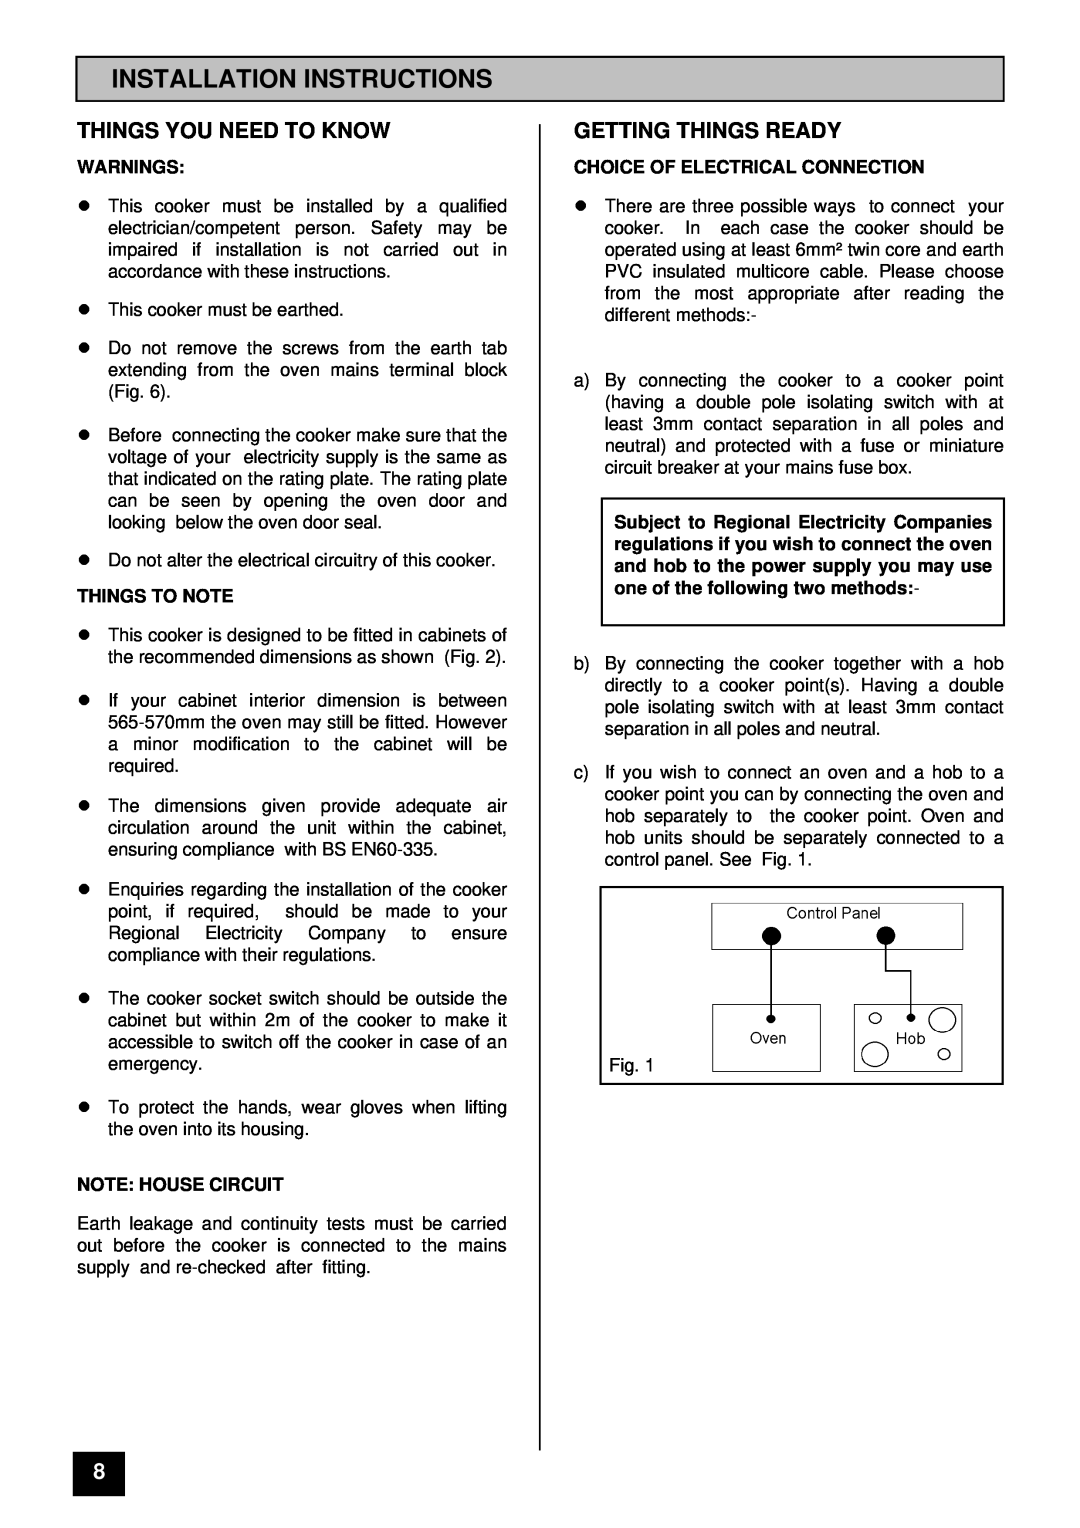 Tricity Bendix BD 913/2 Installation Instructions, Things You Need To Know, Getting Things Ready, Warnings, Things To Note 